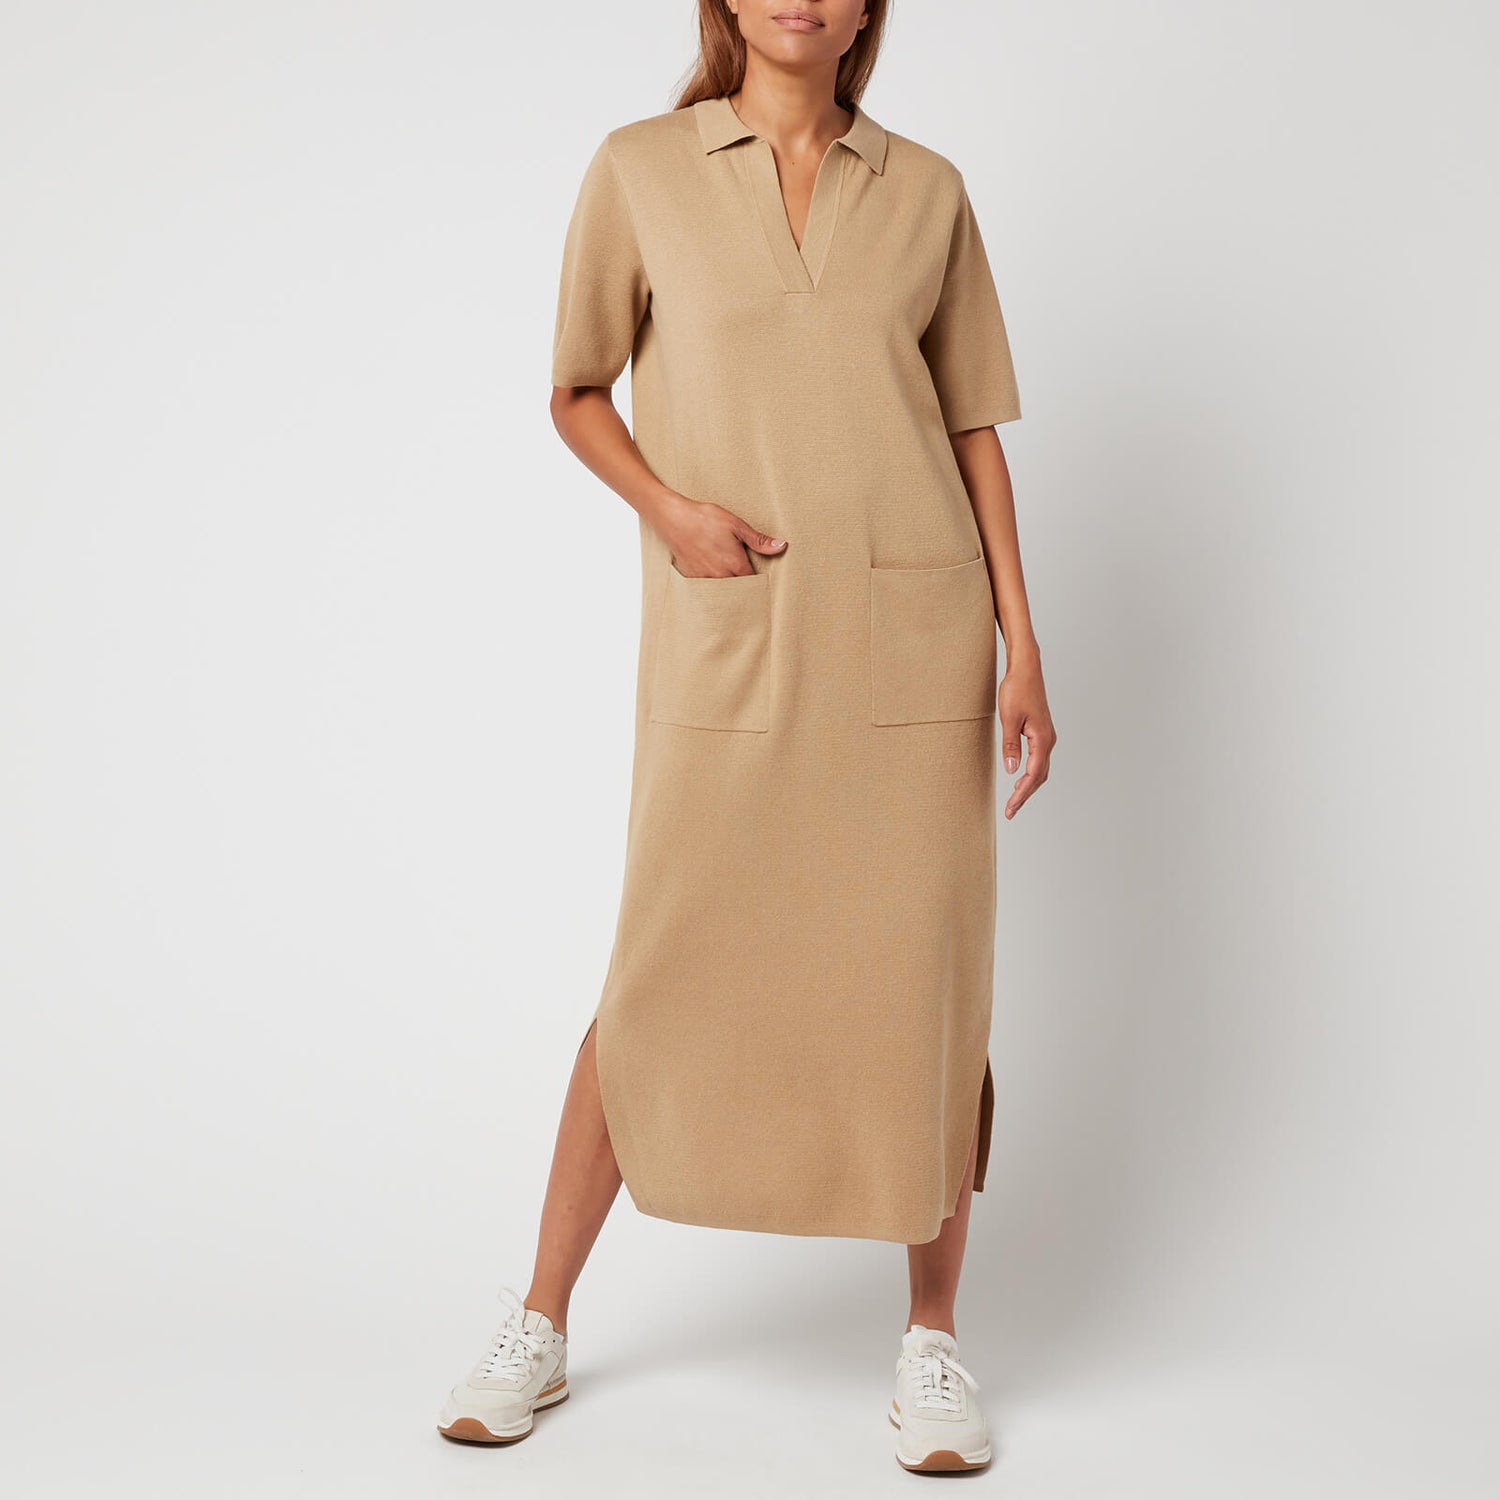 Whistles Women's Polo Neck Knitted Dress - Camel